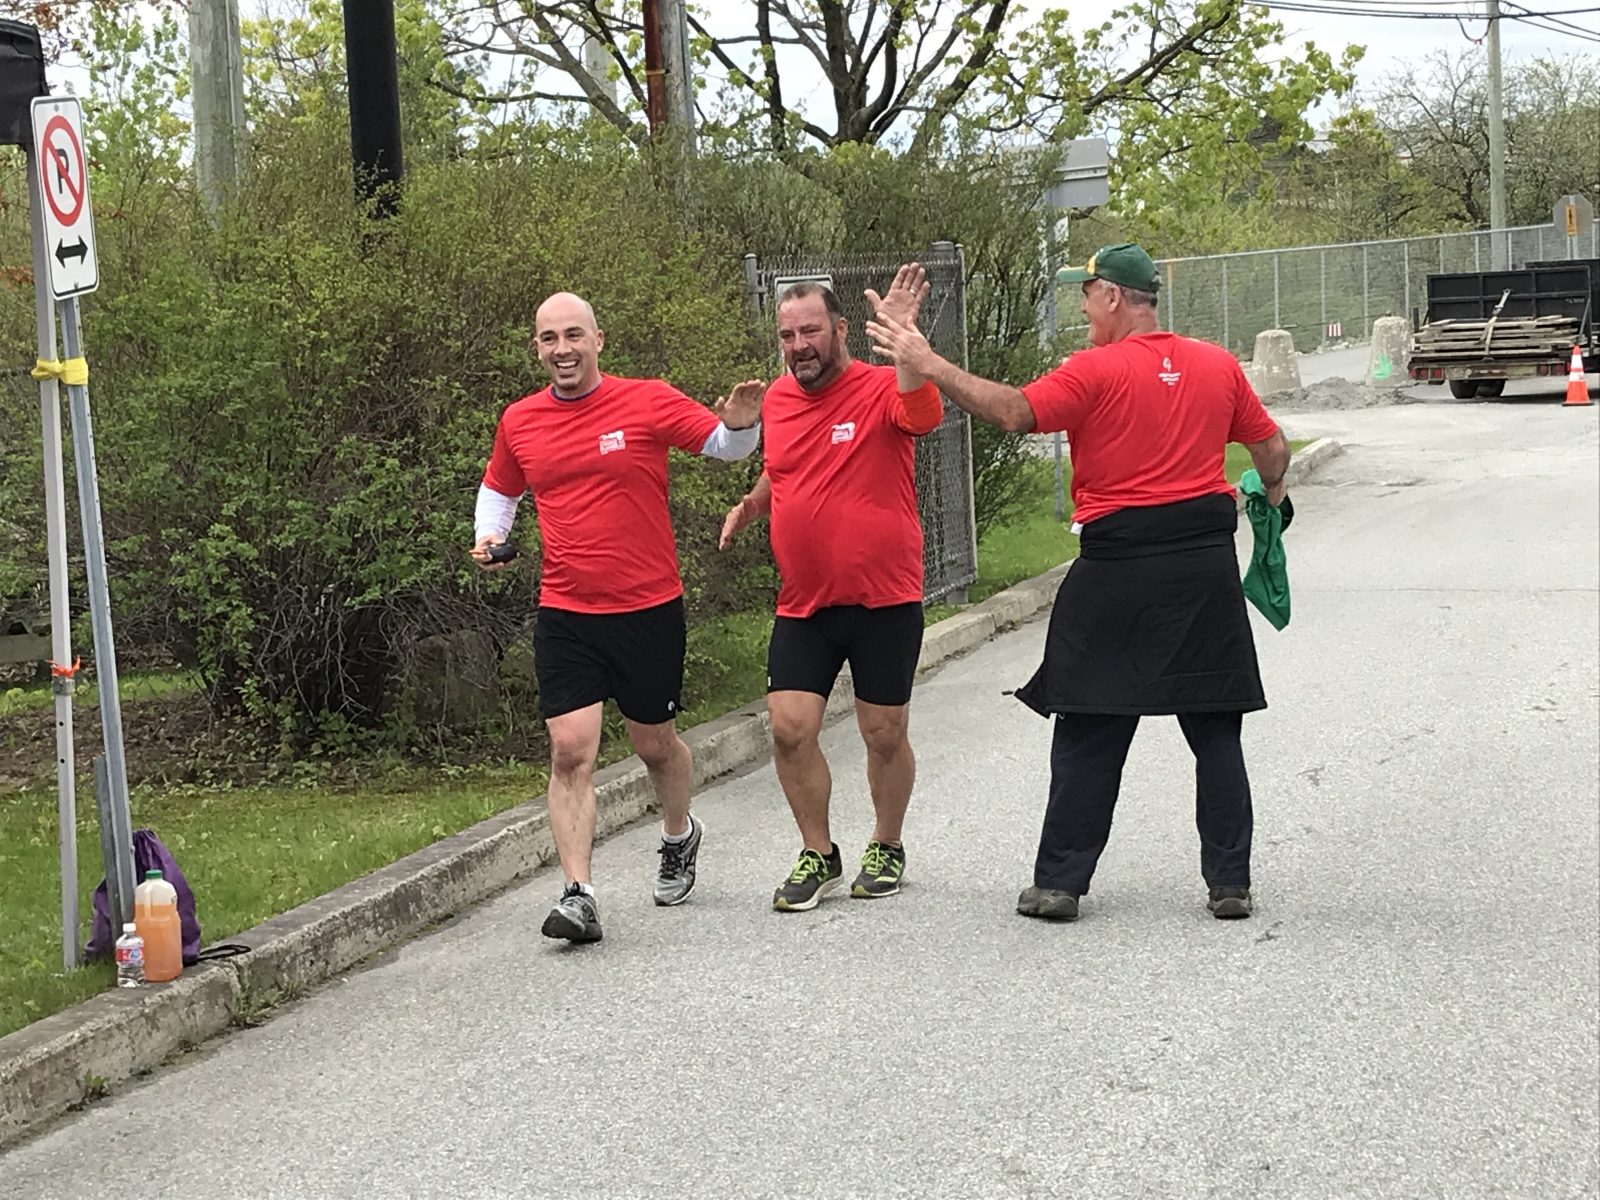 Police ‘carry the torch’ for Special Olympics